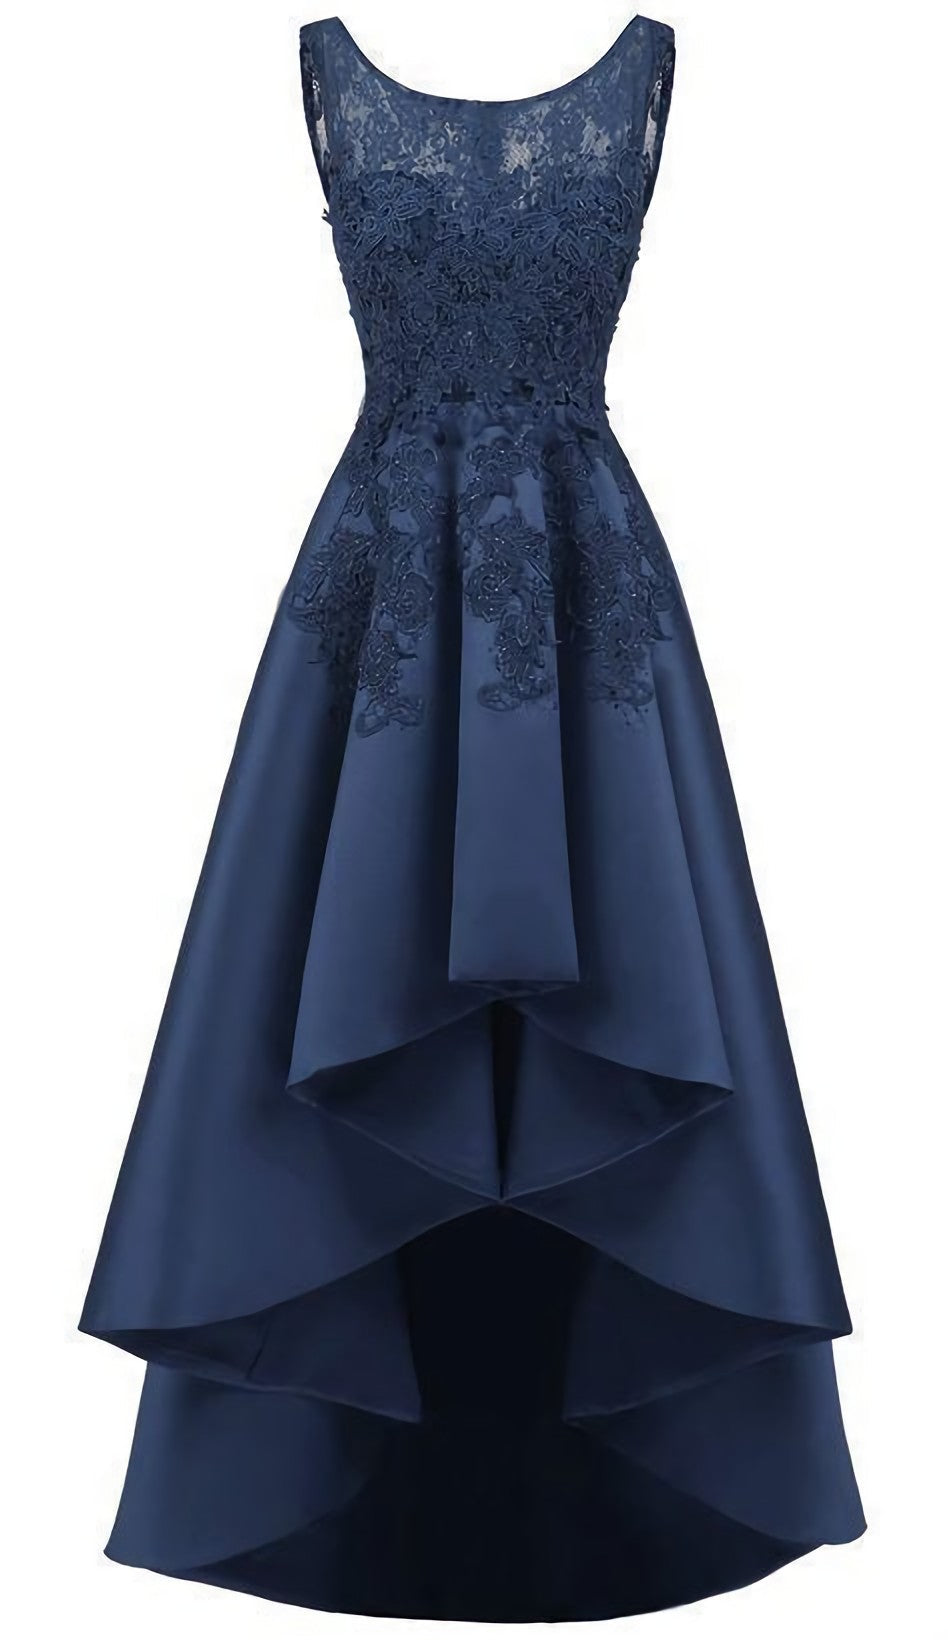 New Arrive Long Corset Formal Corset Prom Dress, Navy Blue Lace Beaded Corset Wedding Party Dresses, High Low Corset Bridesmaid Gowns Formal outfit, Wedding Dresses Designs